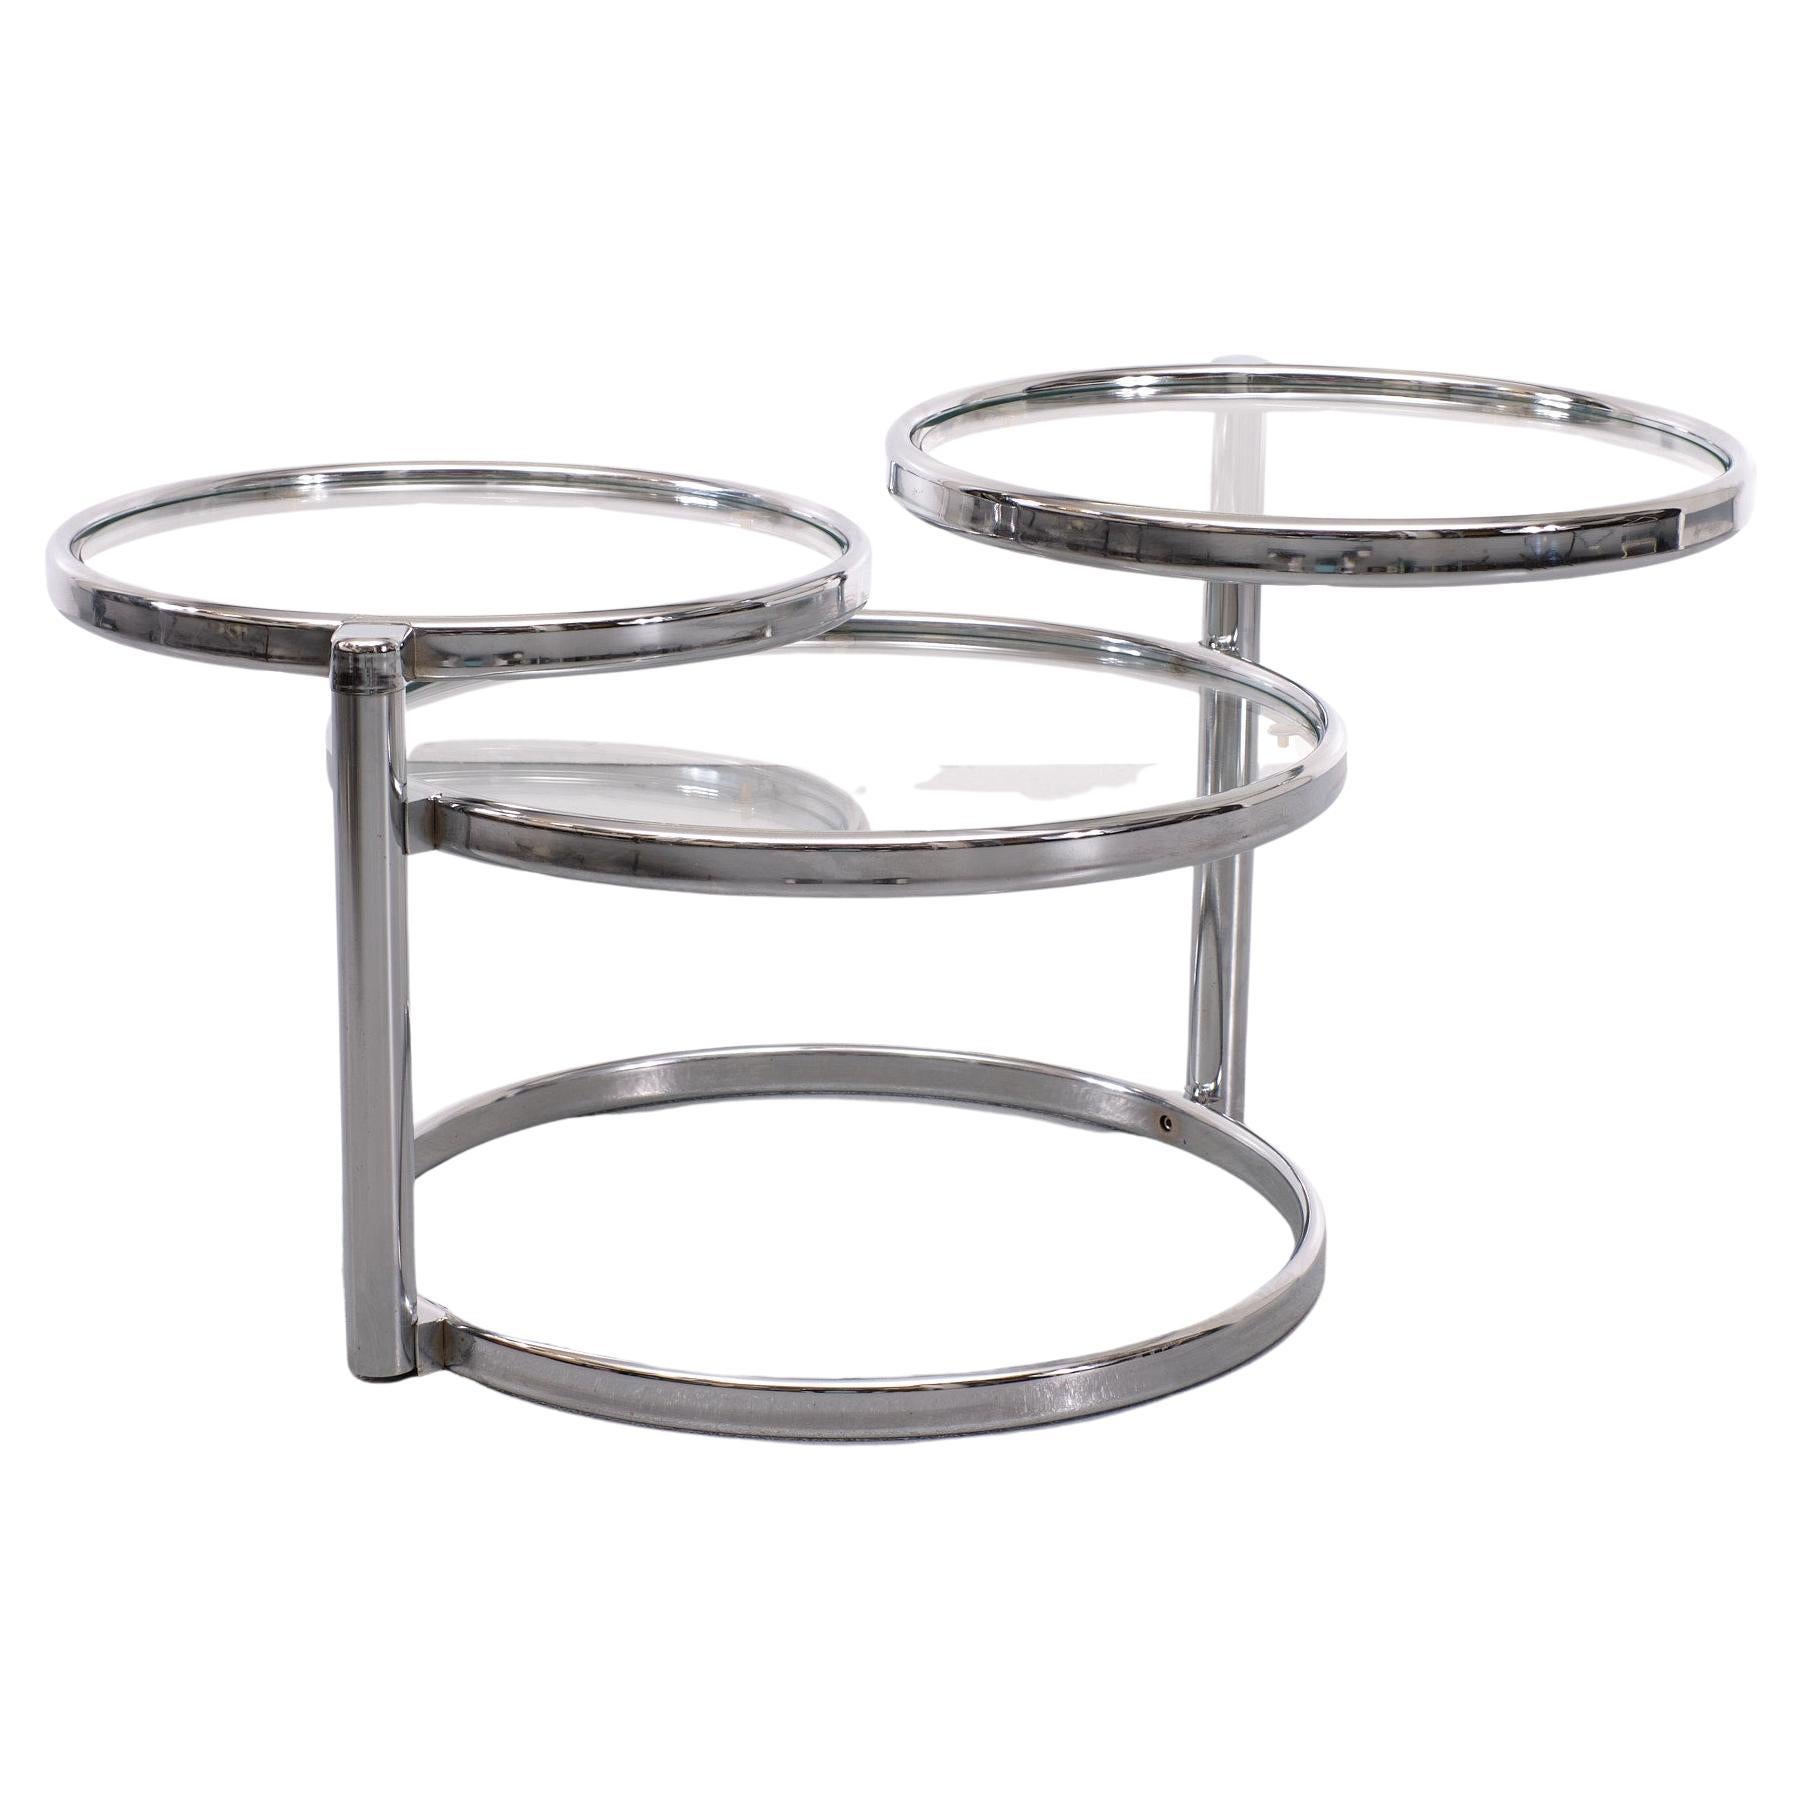 A Chrome plated metal coffee table with a frame consisting of three trays that can be pulled out from the central body by means of two lateral joints.
The model of this table was designed by Milo Baughman during the 1970s.
Very good condition . Nice